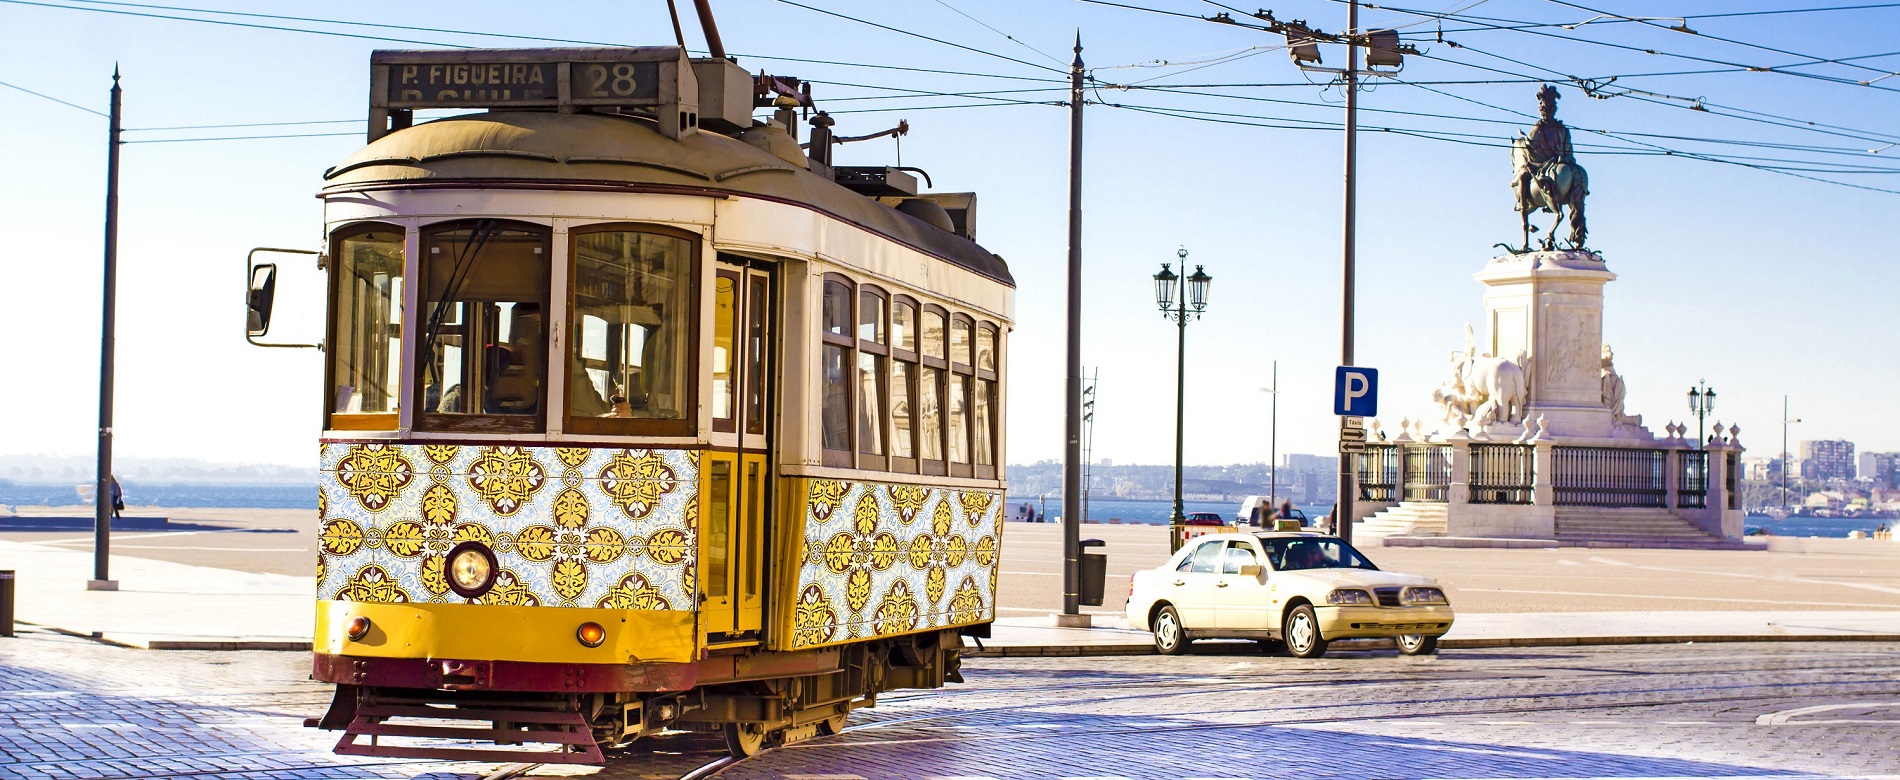 View of a street with a tram in Lisbon.